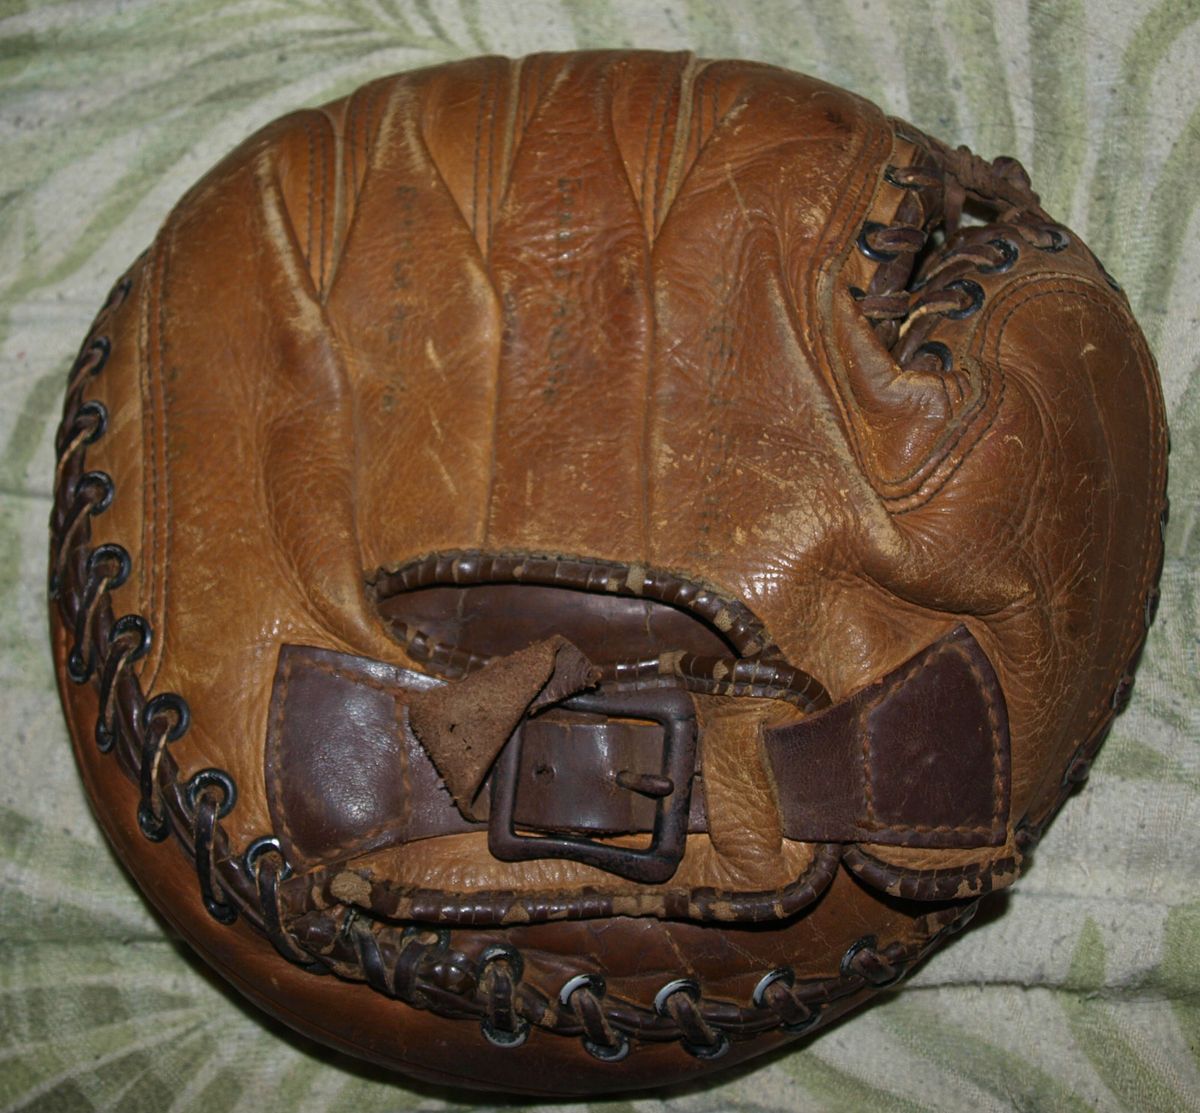 Vintage Bill Dickey Hand Moulded Palm Baseball Glove